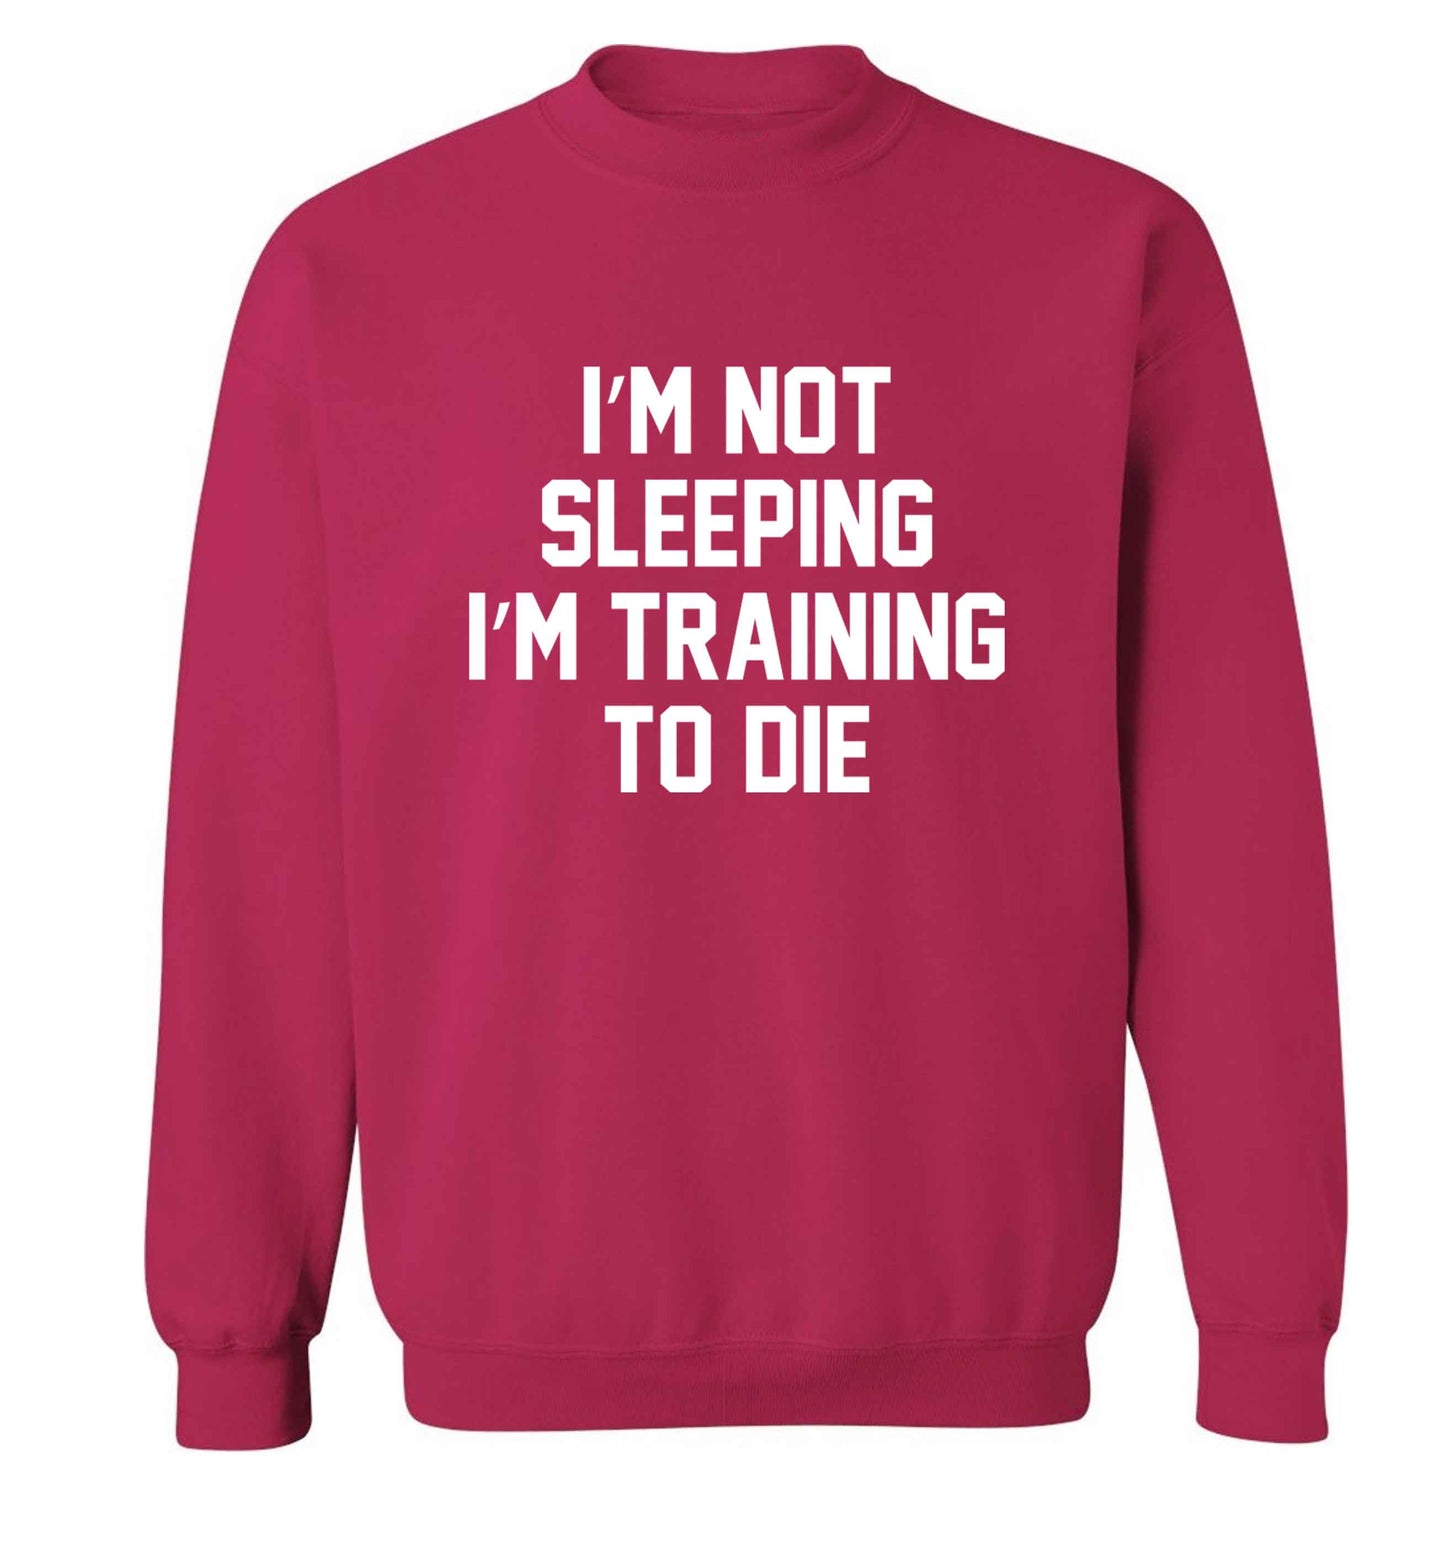 I'm not sleeping I'm training to die adult's unisex pink sweater 2XL